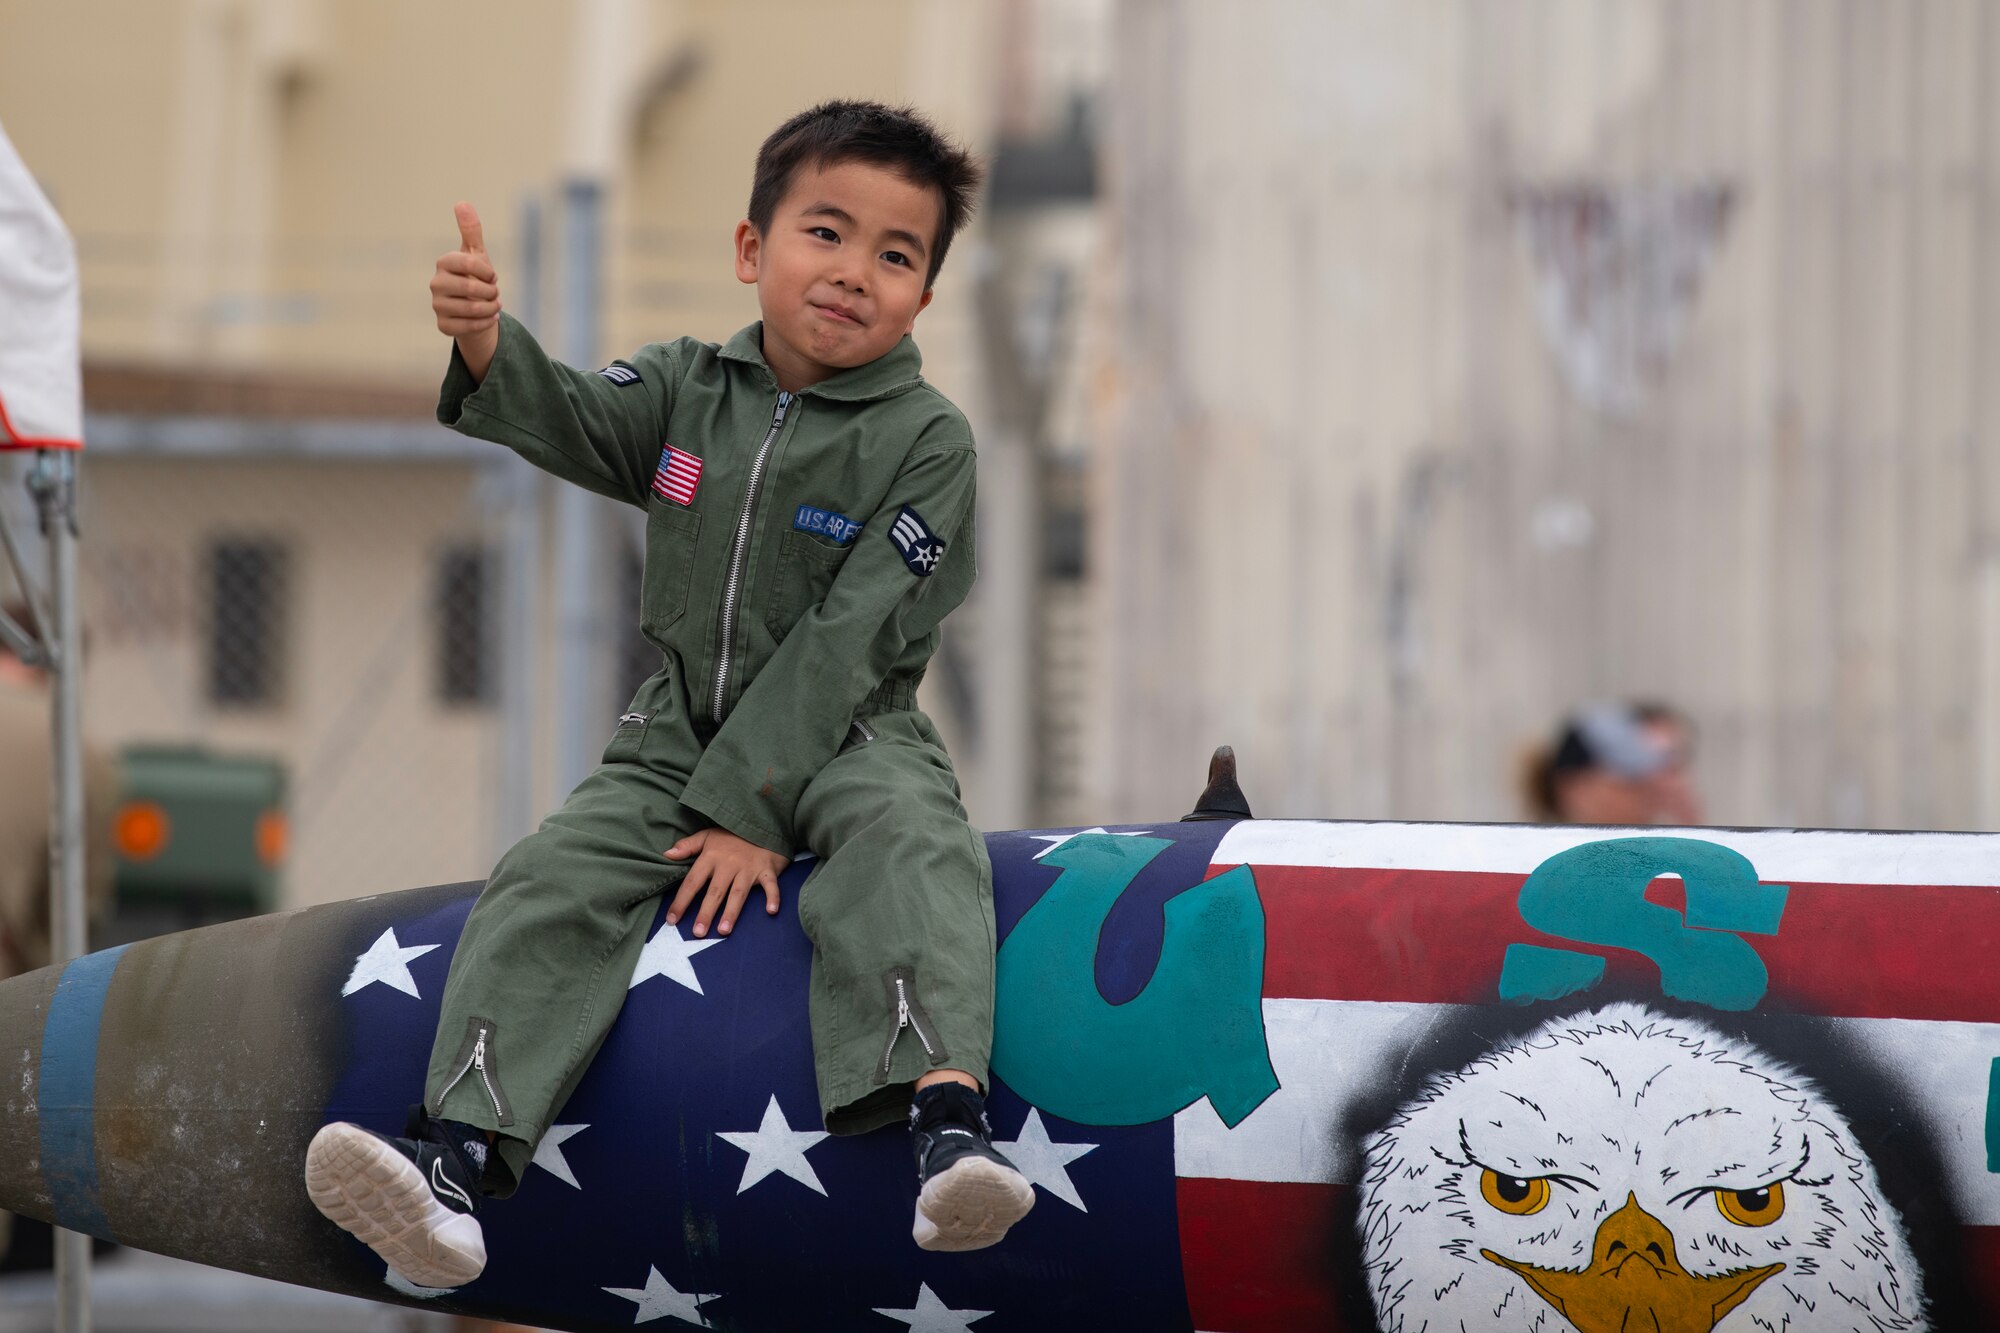 An America Fest 2023 attendee sits on a static display at Kadena Air Base, Japan, April 22, 2023. America Fest is Kadena Air Base’s open house event where attendees viewed static aircraft displays, interacted with U.S. service members and enjoyed a wide variety of entertainment and activities. (U.S. Air Force photo by Senior Airman Jessi Roth)